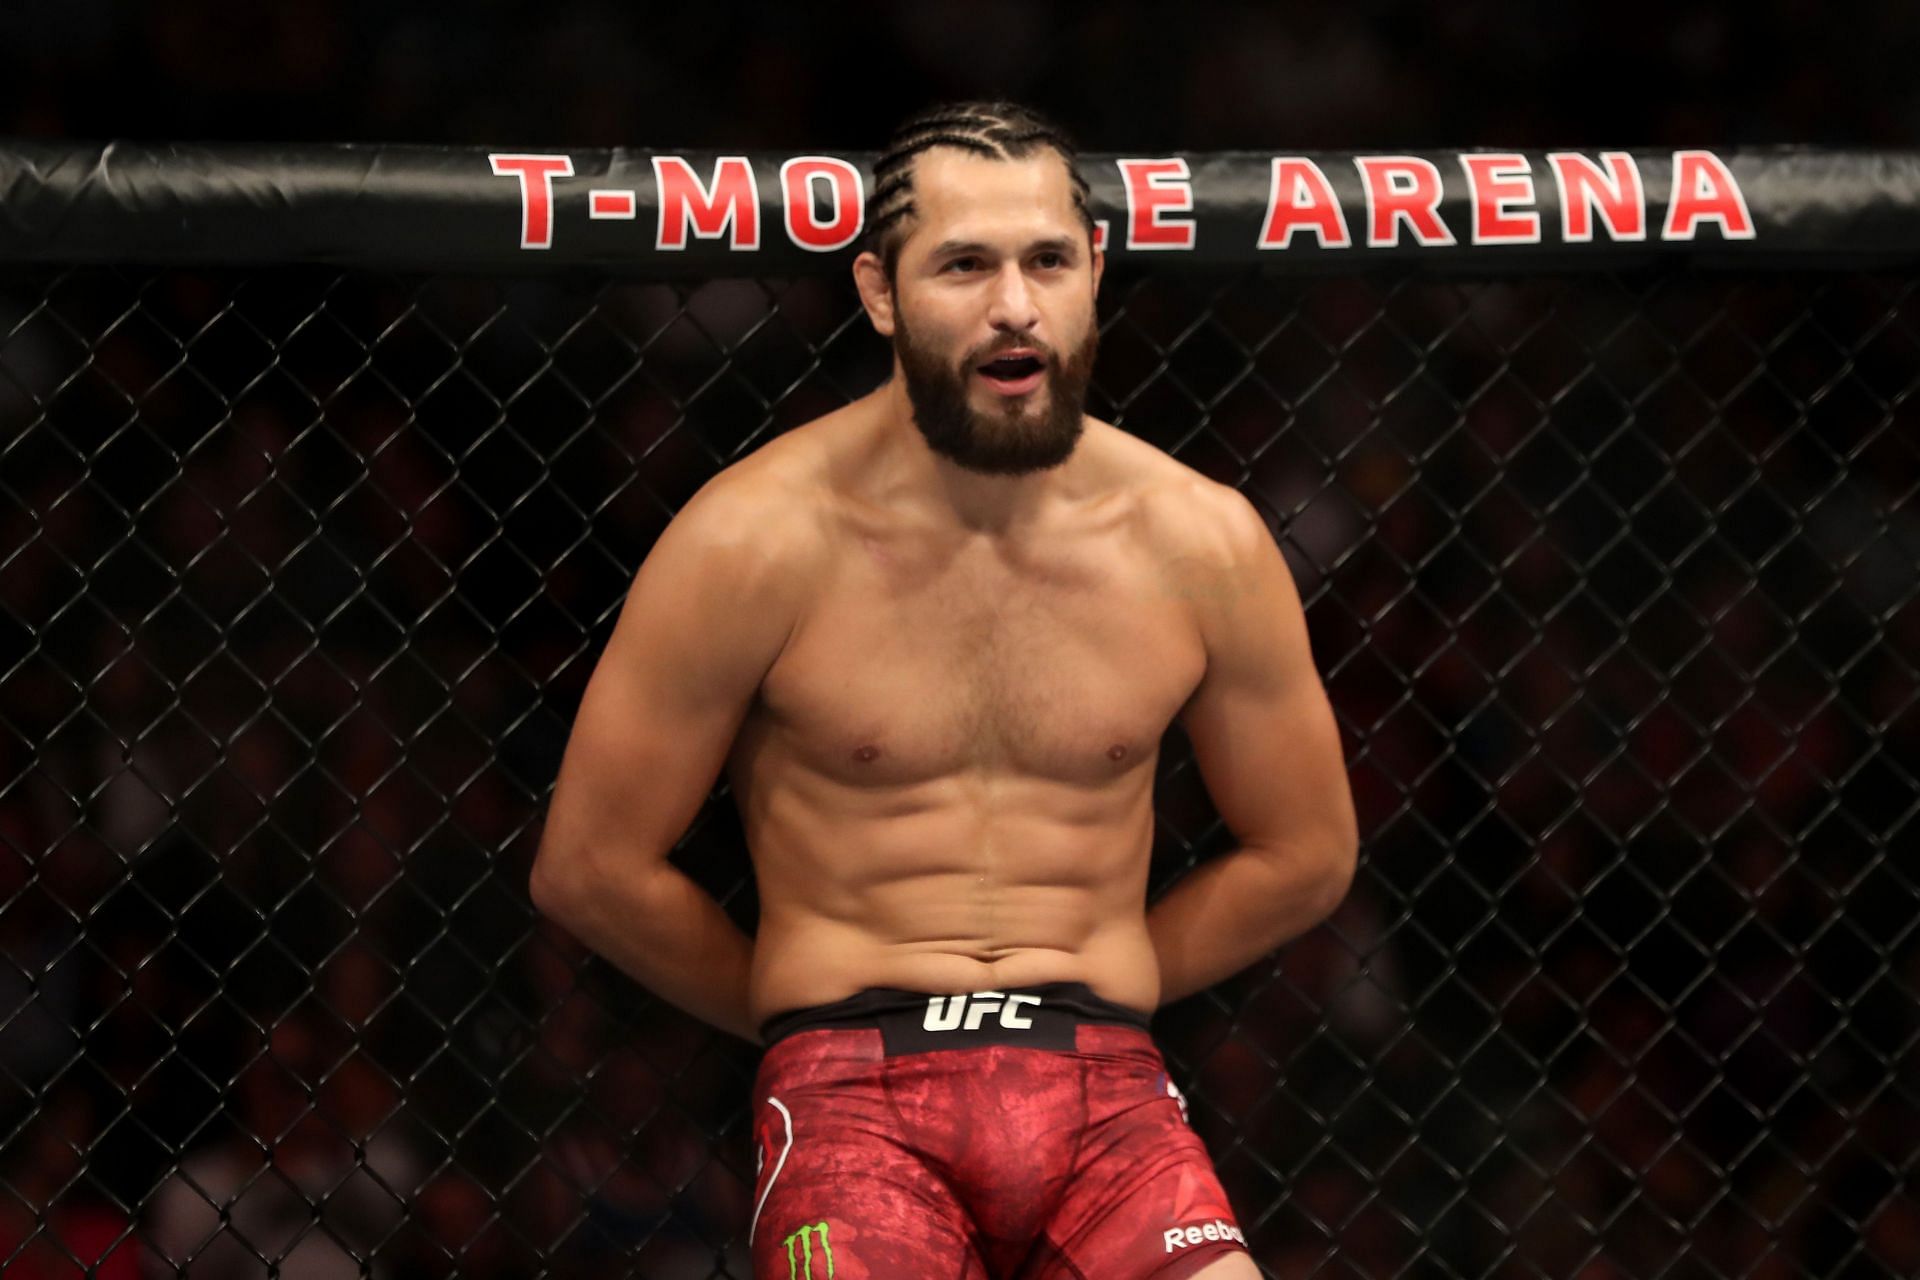 Jorge Masvidal prior to his bout at UFC 239